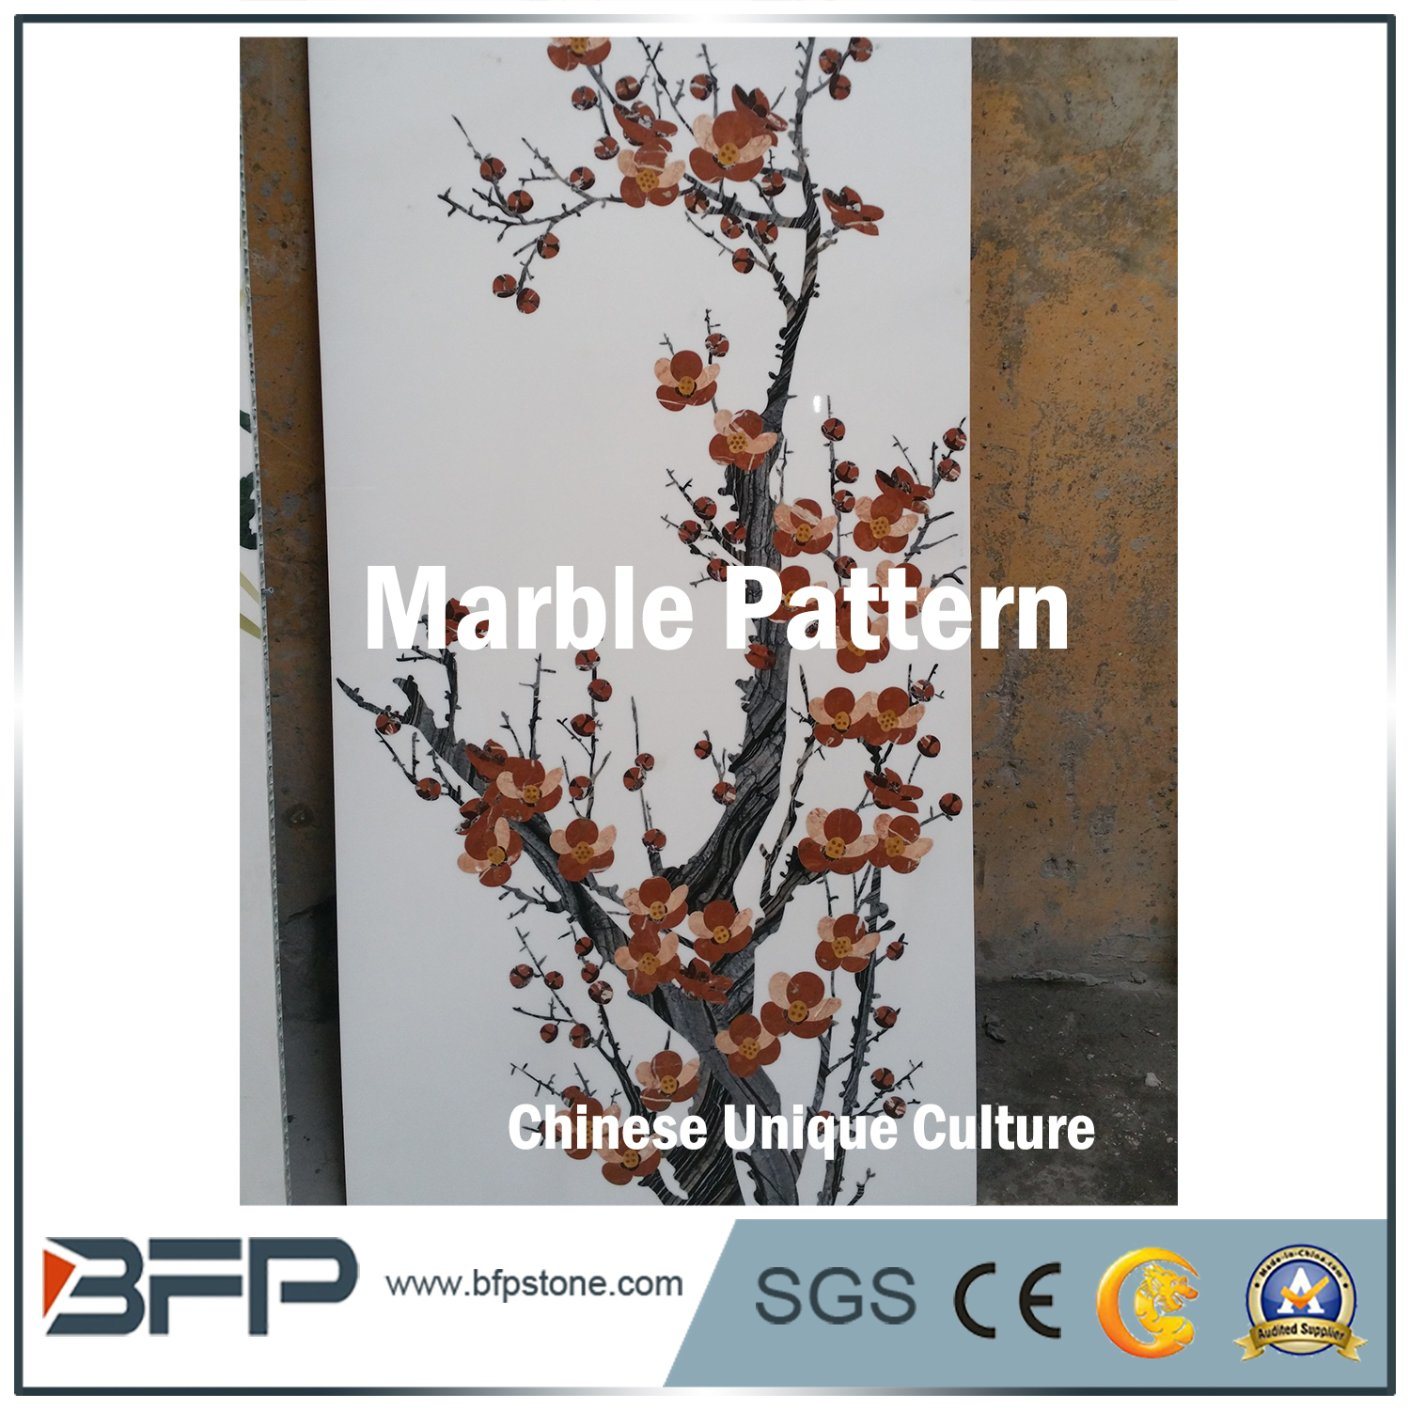 Chinese Culture Plum Blossoms- Unique Marble Wall Medallion Pattern Design